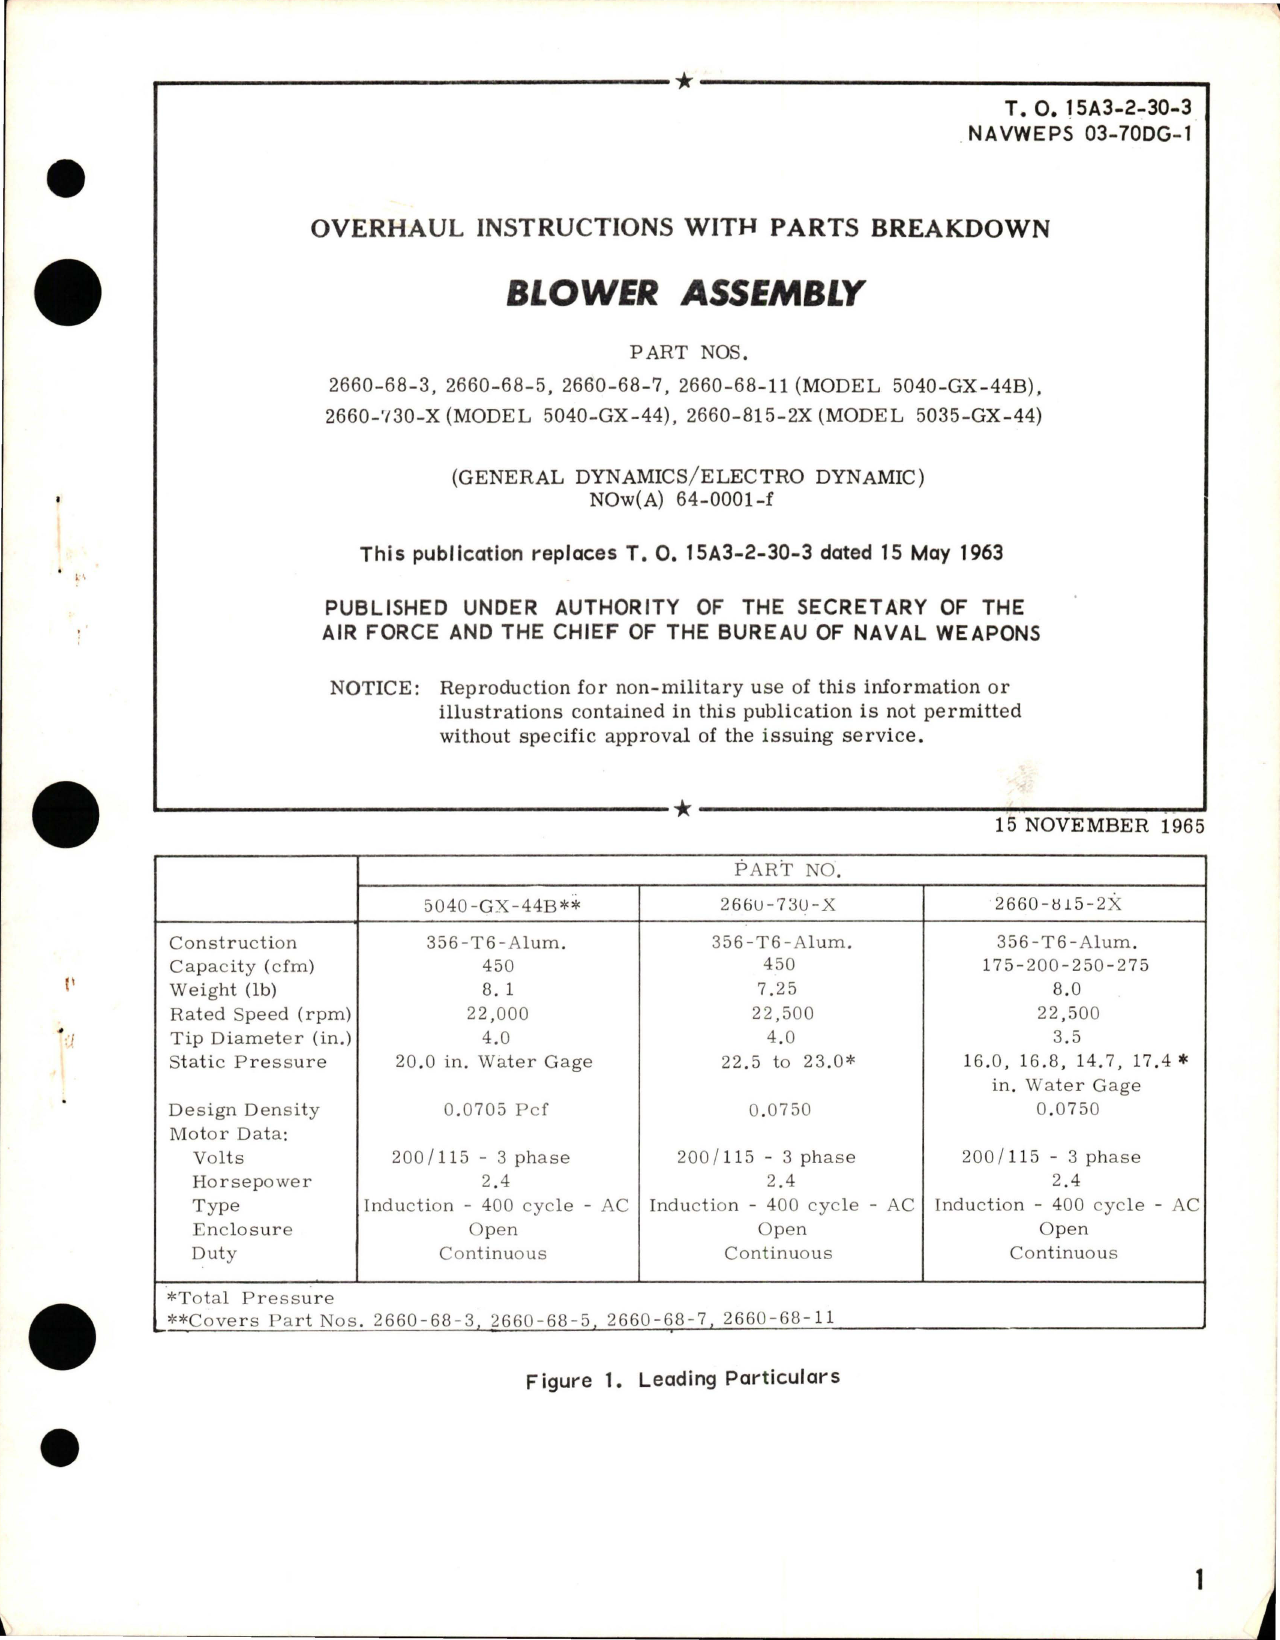 Sample page 1 from AirCorps Library document: Overhaul Instructions with Parts Breakdown for Blower Assembly 